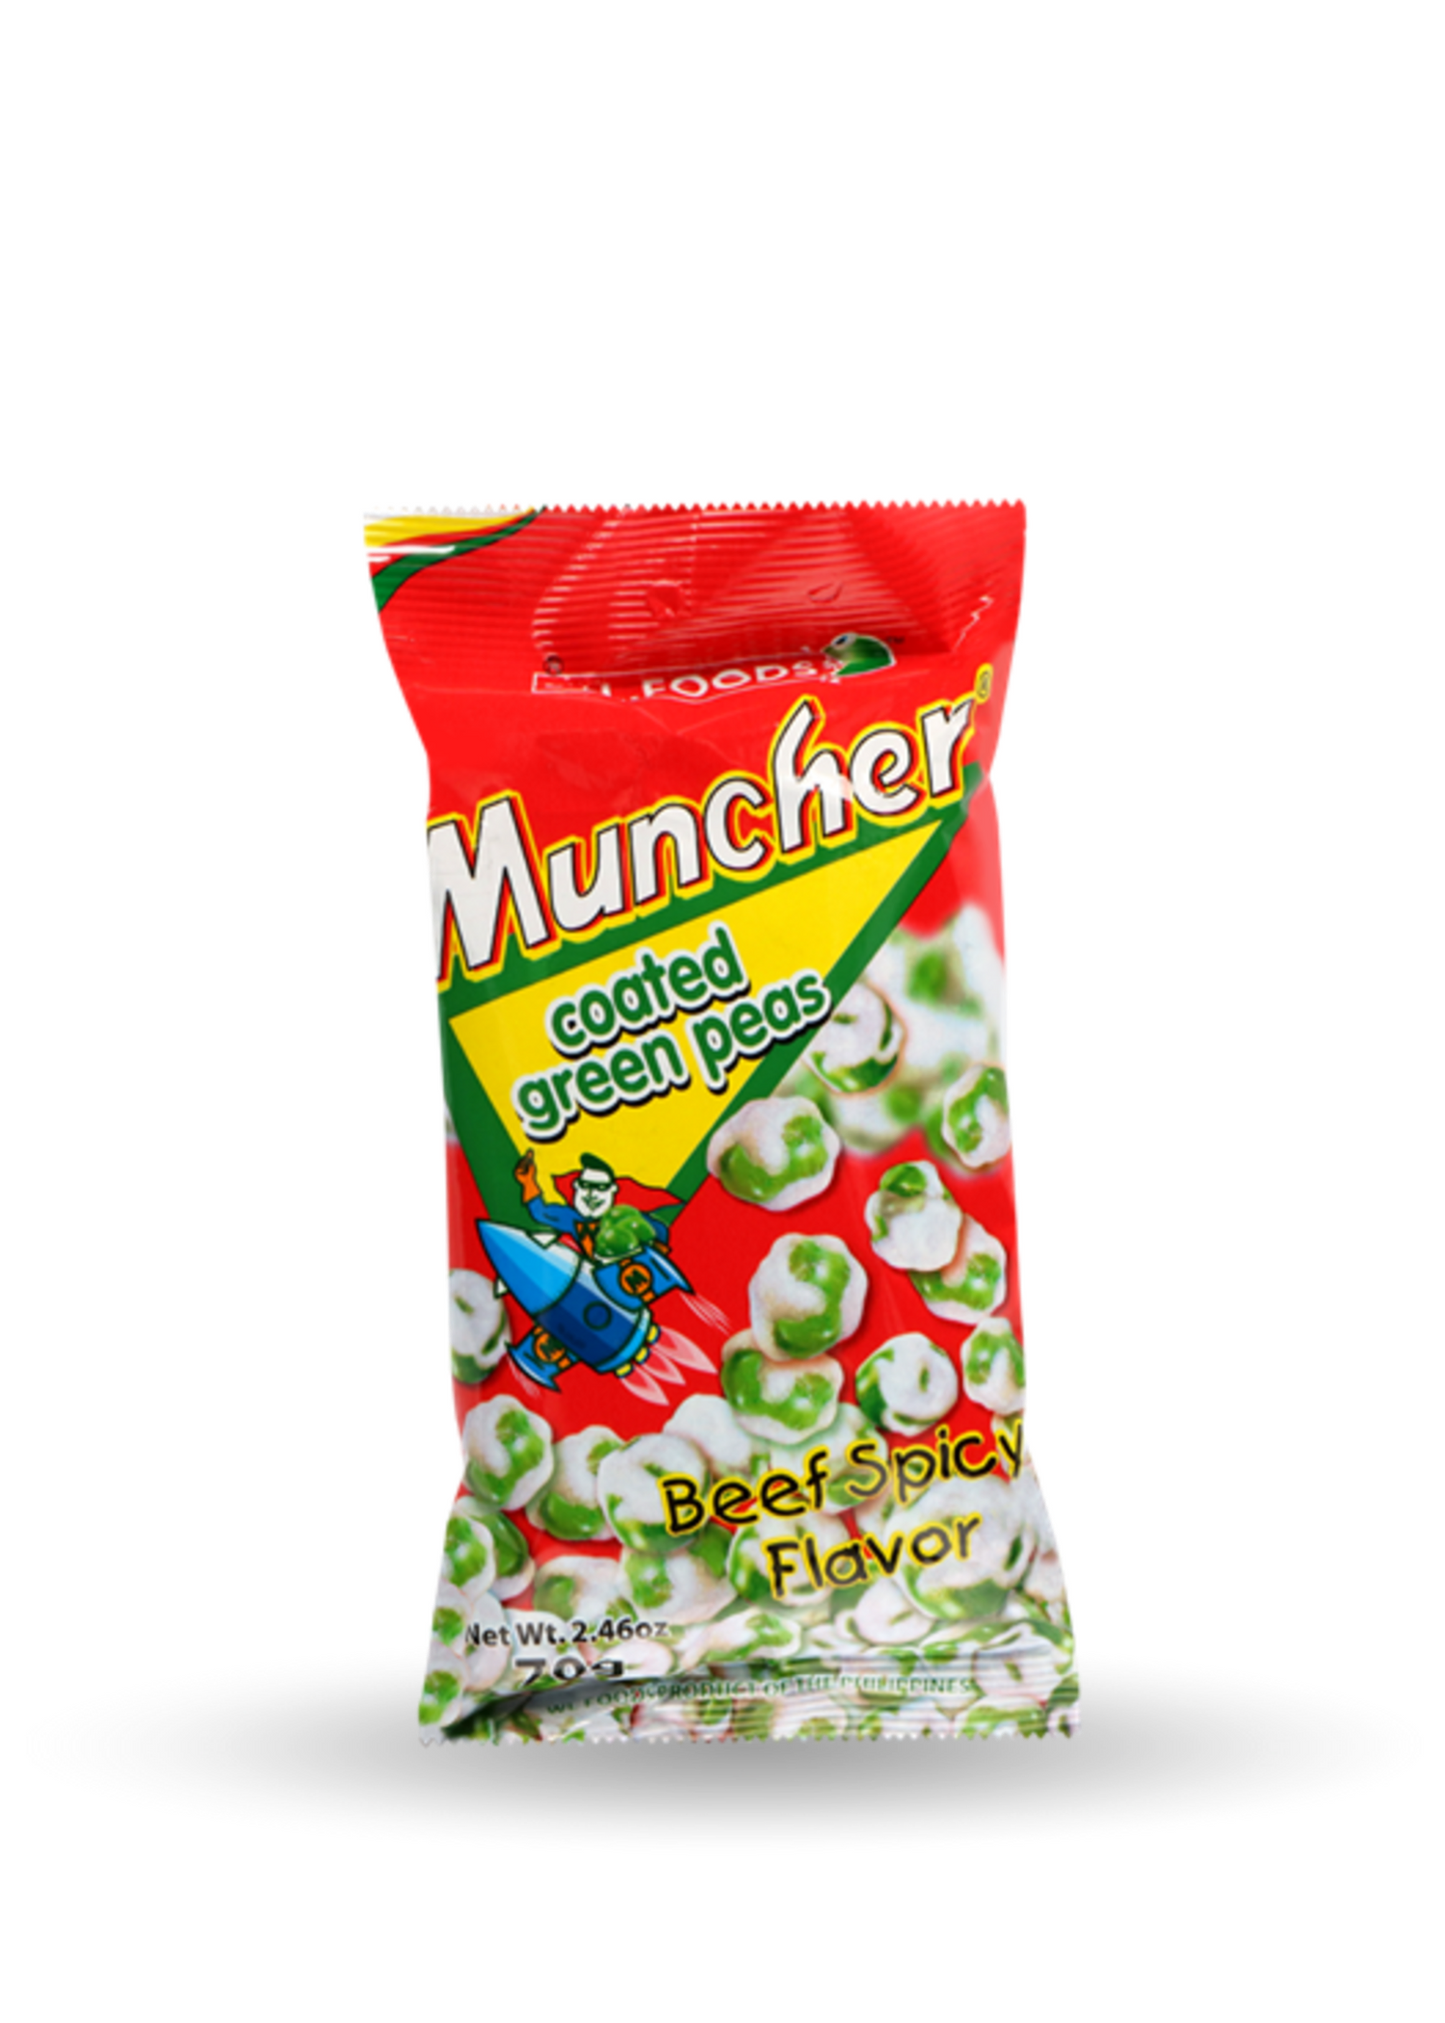 W.L. | Muncher Coated Green Peas | Beef